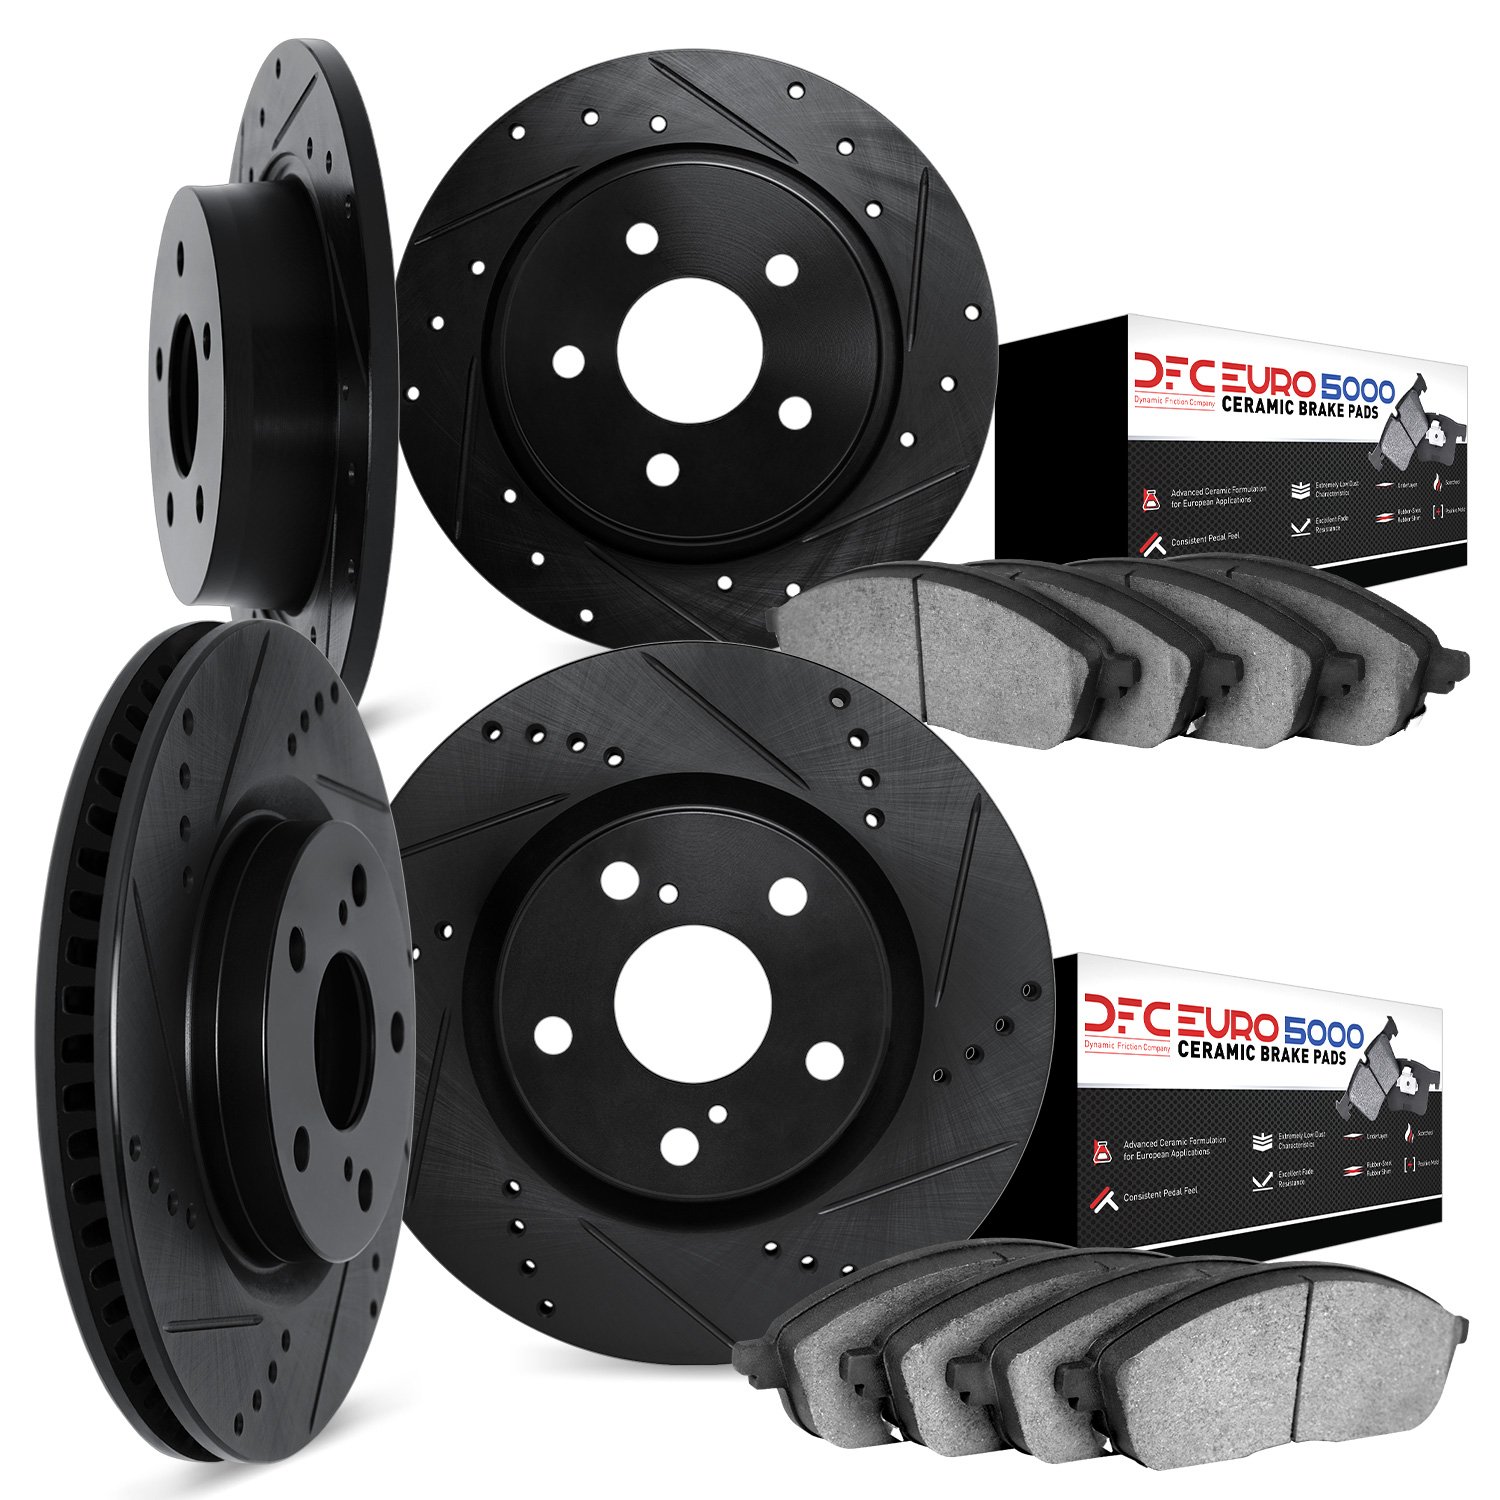 8604-11001 Drilled/Slotted Brake Rotors w/5000 Euro Ceramic Brake Pads Kit [Black], 1999-2004 Land Rover, Position: Front and Re